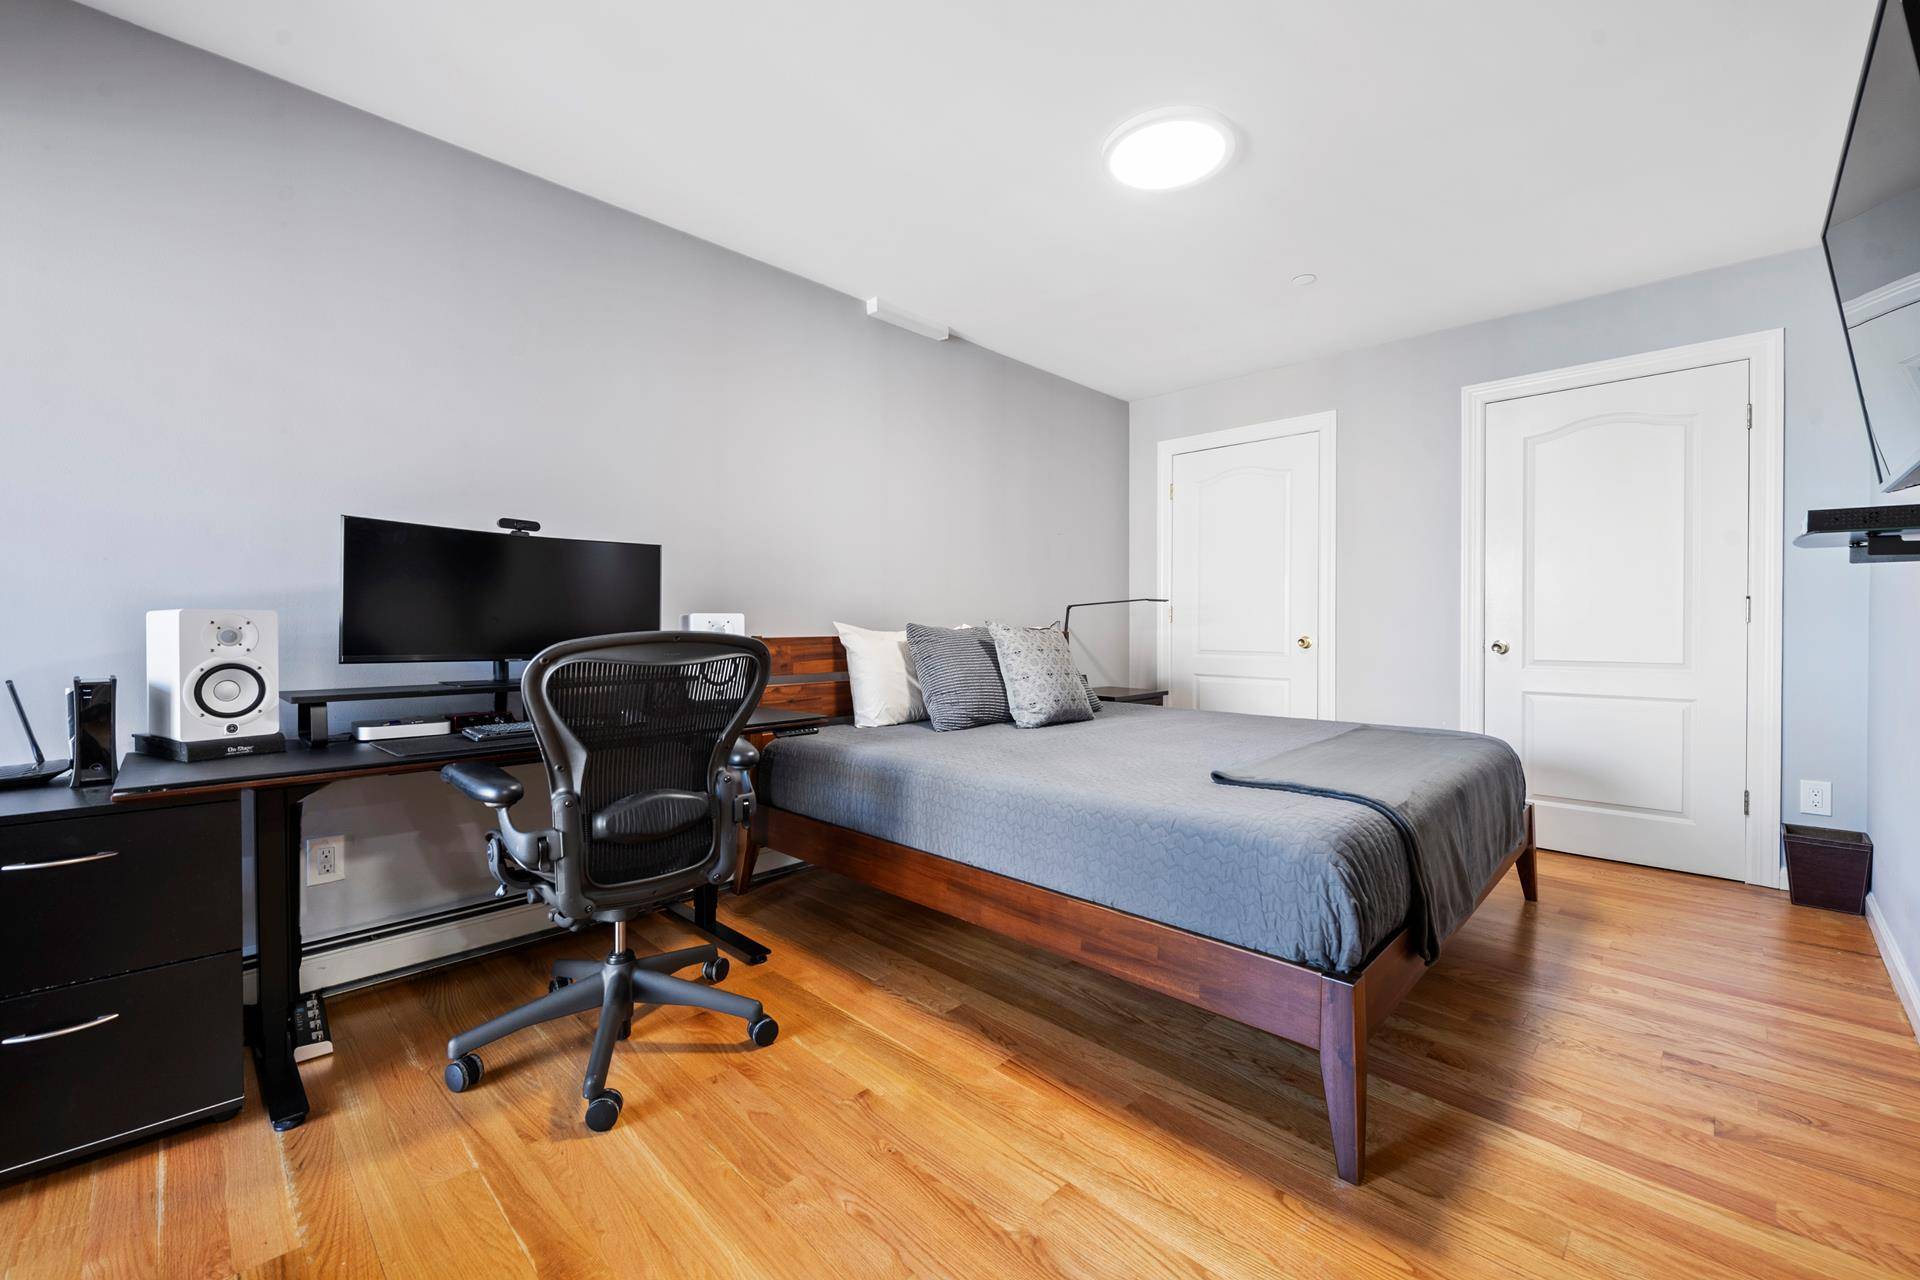 Introducing a sophisticated 1 bedroom, 1 bathroom condo, nestled in the vibrant neighborhood of Astoria.